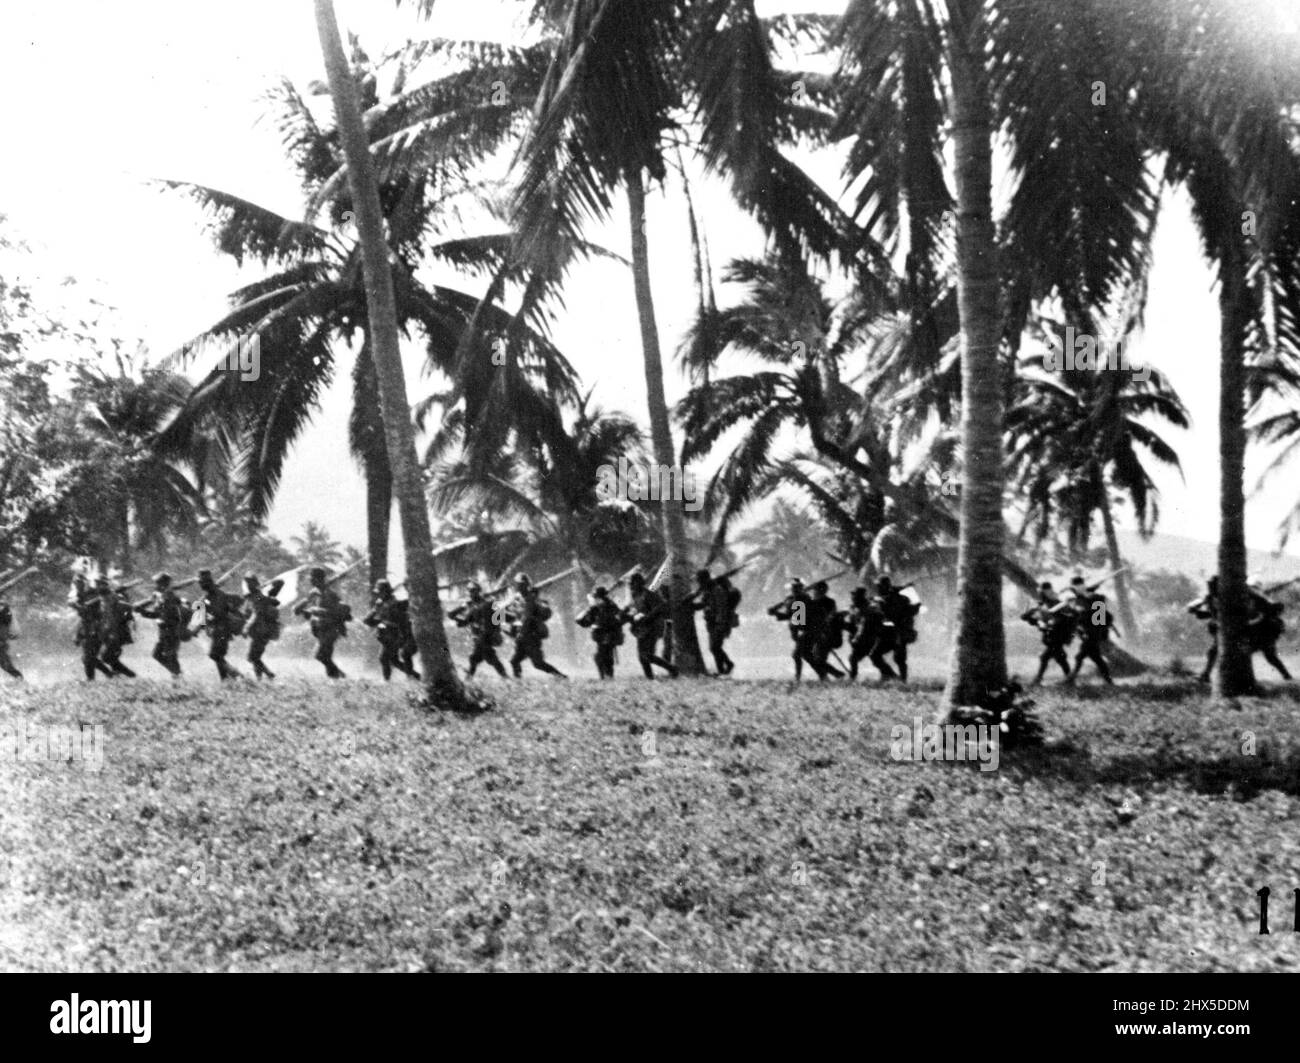 *****... A Japanese insurgent is seen as pursuing the Chinese remnants under the tropical trees. Bishop Scharmach's reminiscences, 'This Crowd Beats Us All' is published by the Catholic Press Newspaper Co. Ltd. February 25, 1939. (Photo by The Domei News Photos Service). Stock Photo